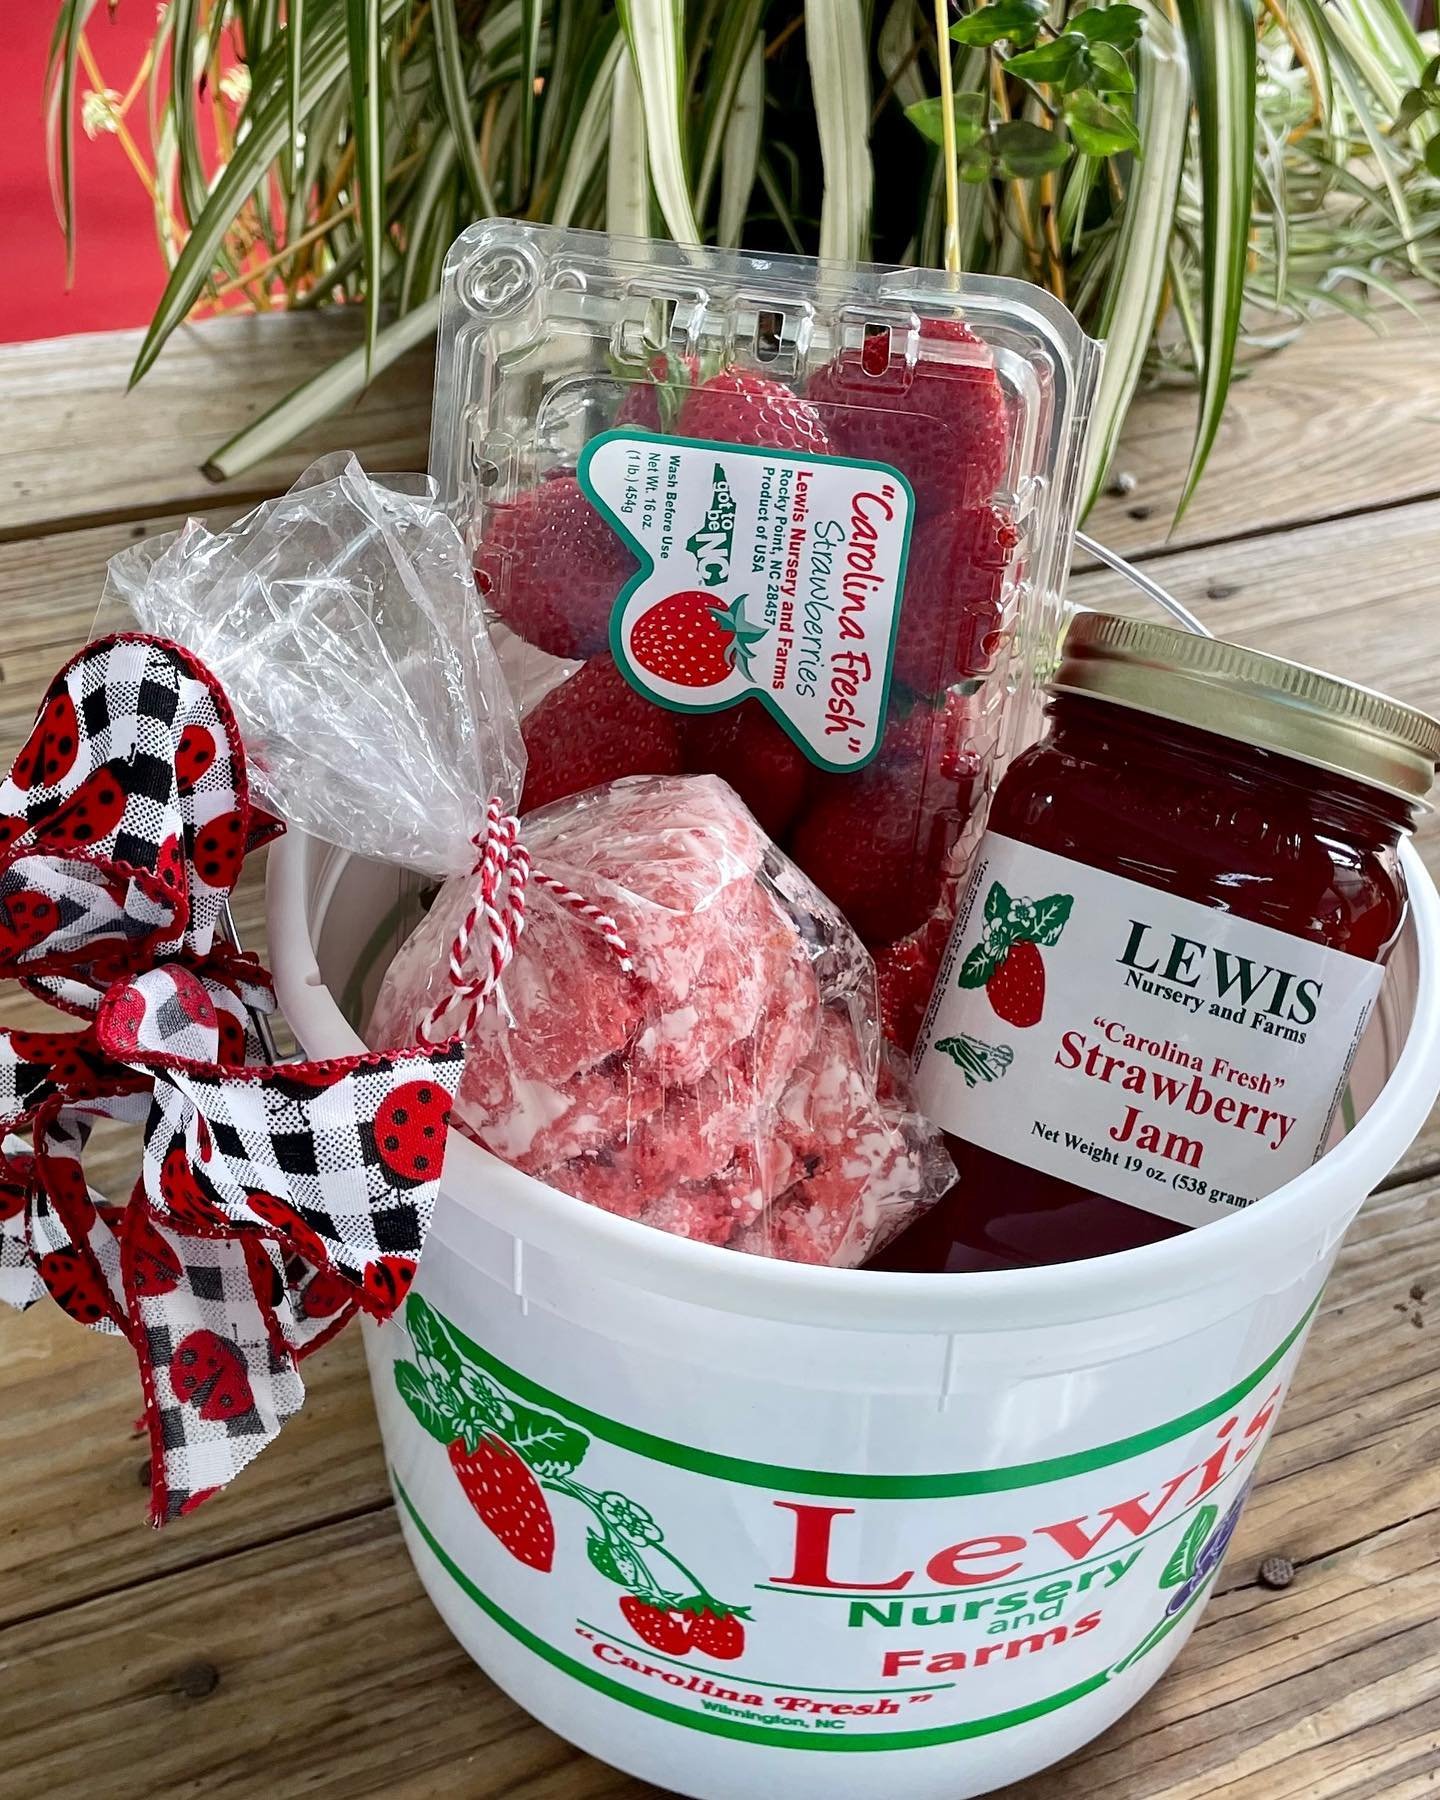 Don&rsquo;t forget your teachers and mothers! Gift buckets available with strawberries, jam, and cookies! 🍓 Our shade house is still full of beautiful flowers, hanging baskets, and combination pots 🌸🪴